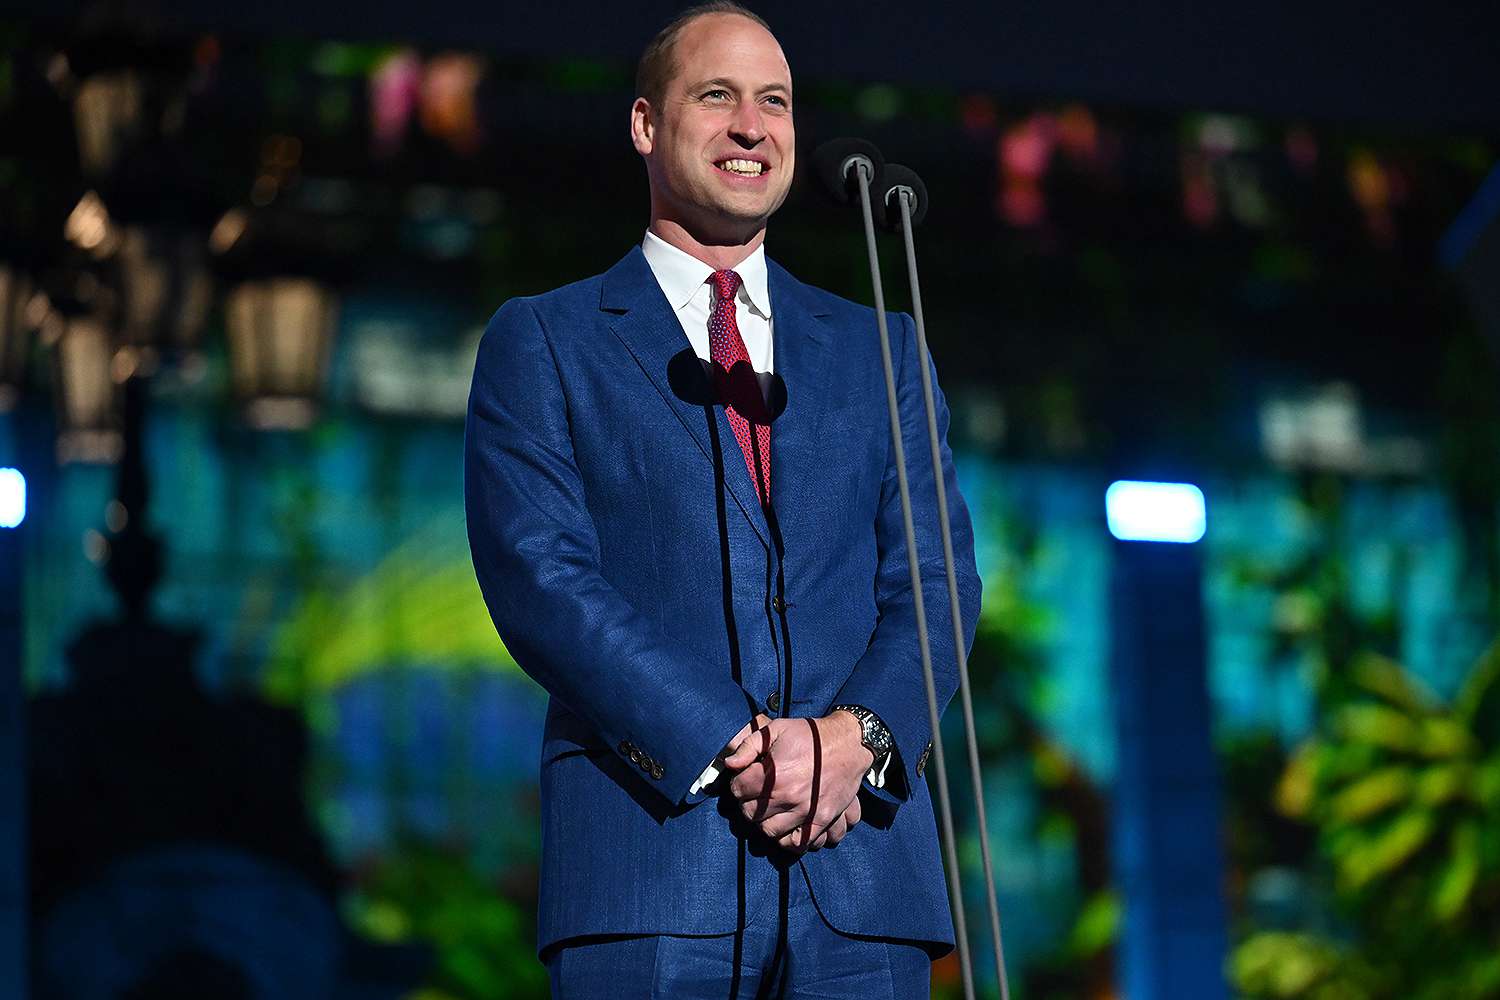 Prince William Lets Out a Candid Laugh on Stage Thanks to a Singing Fan in Viral Clip